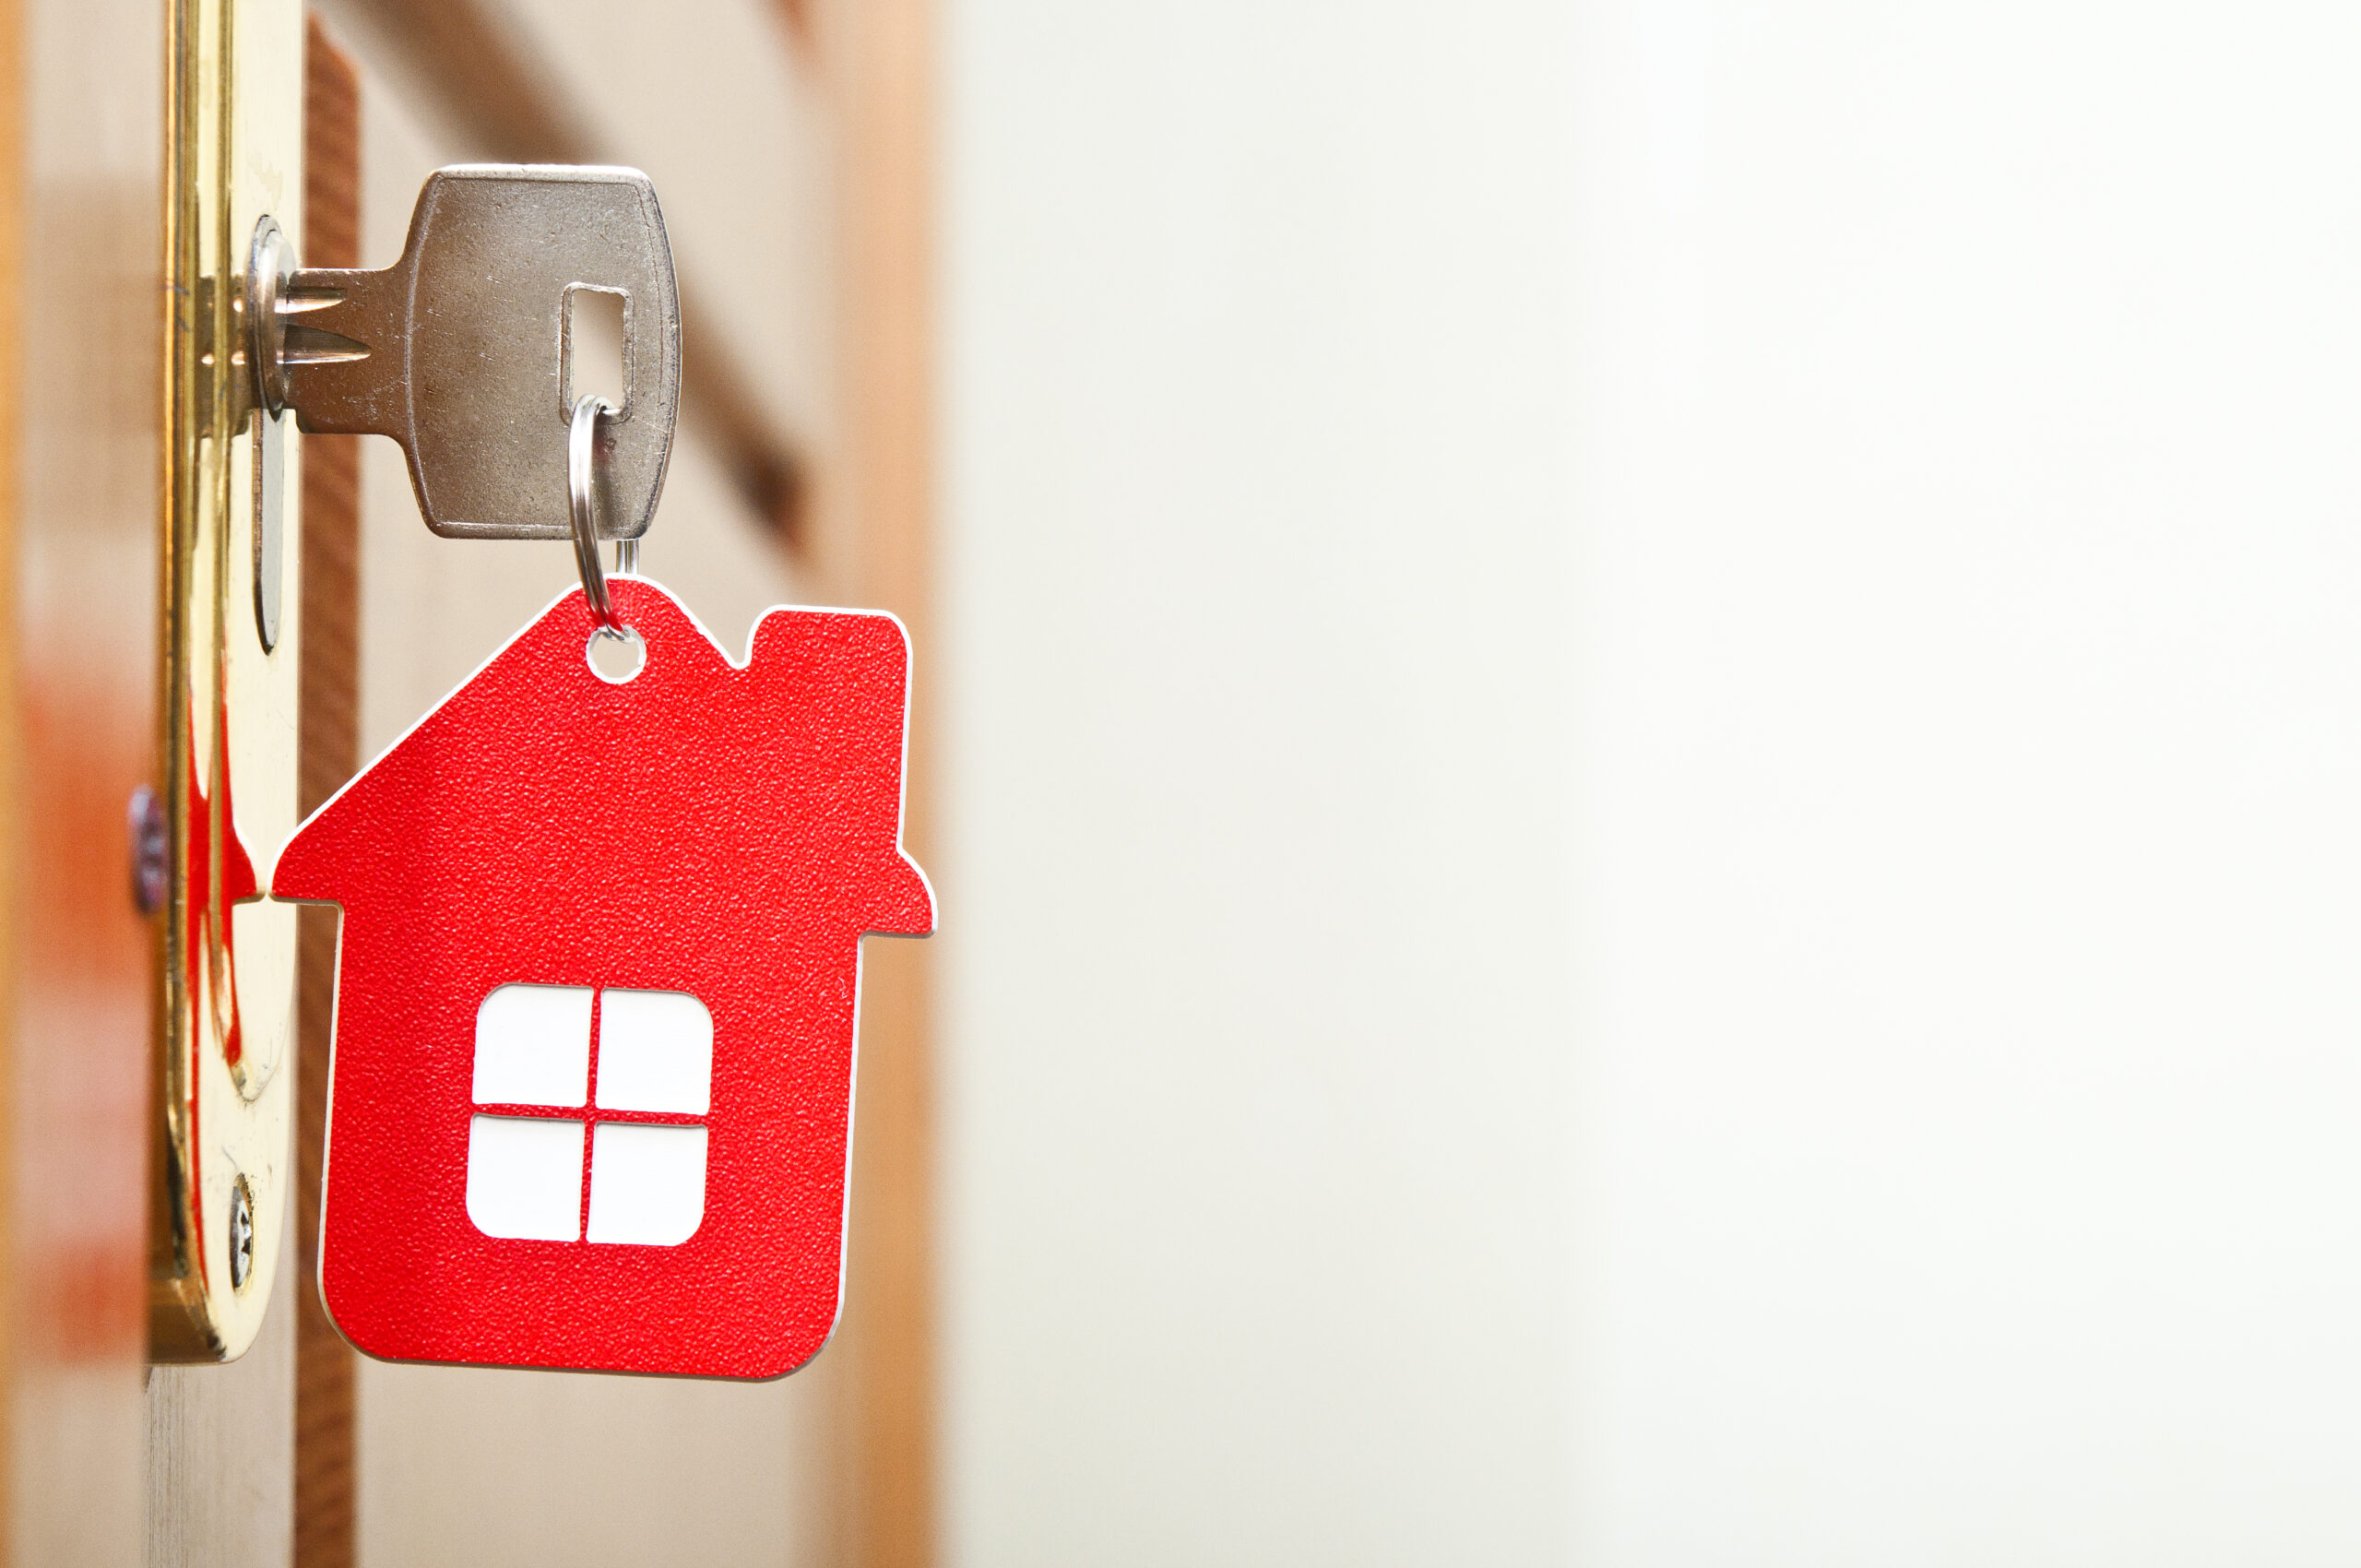 A key ring in the shape of a red house attached to a key in a door